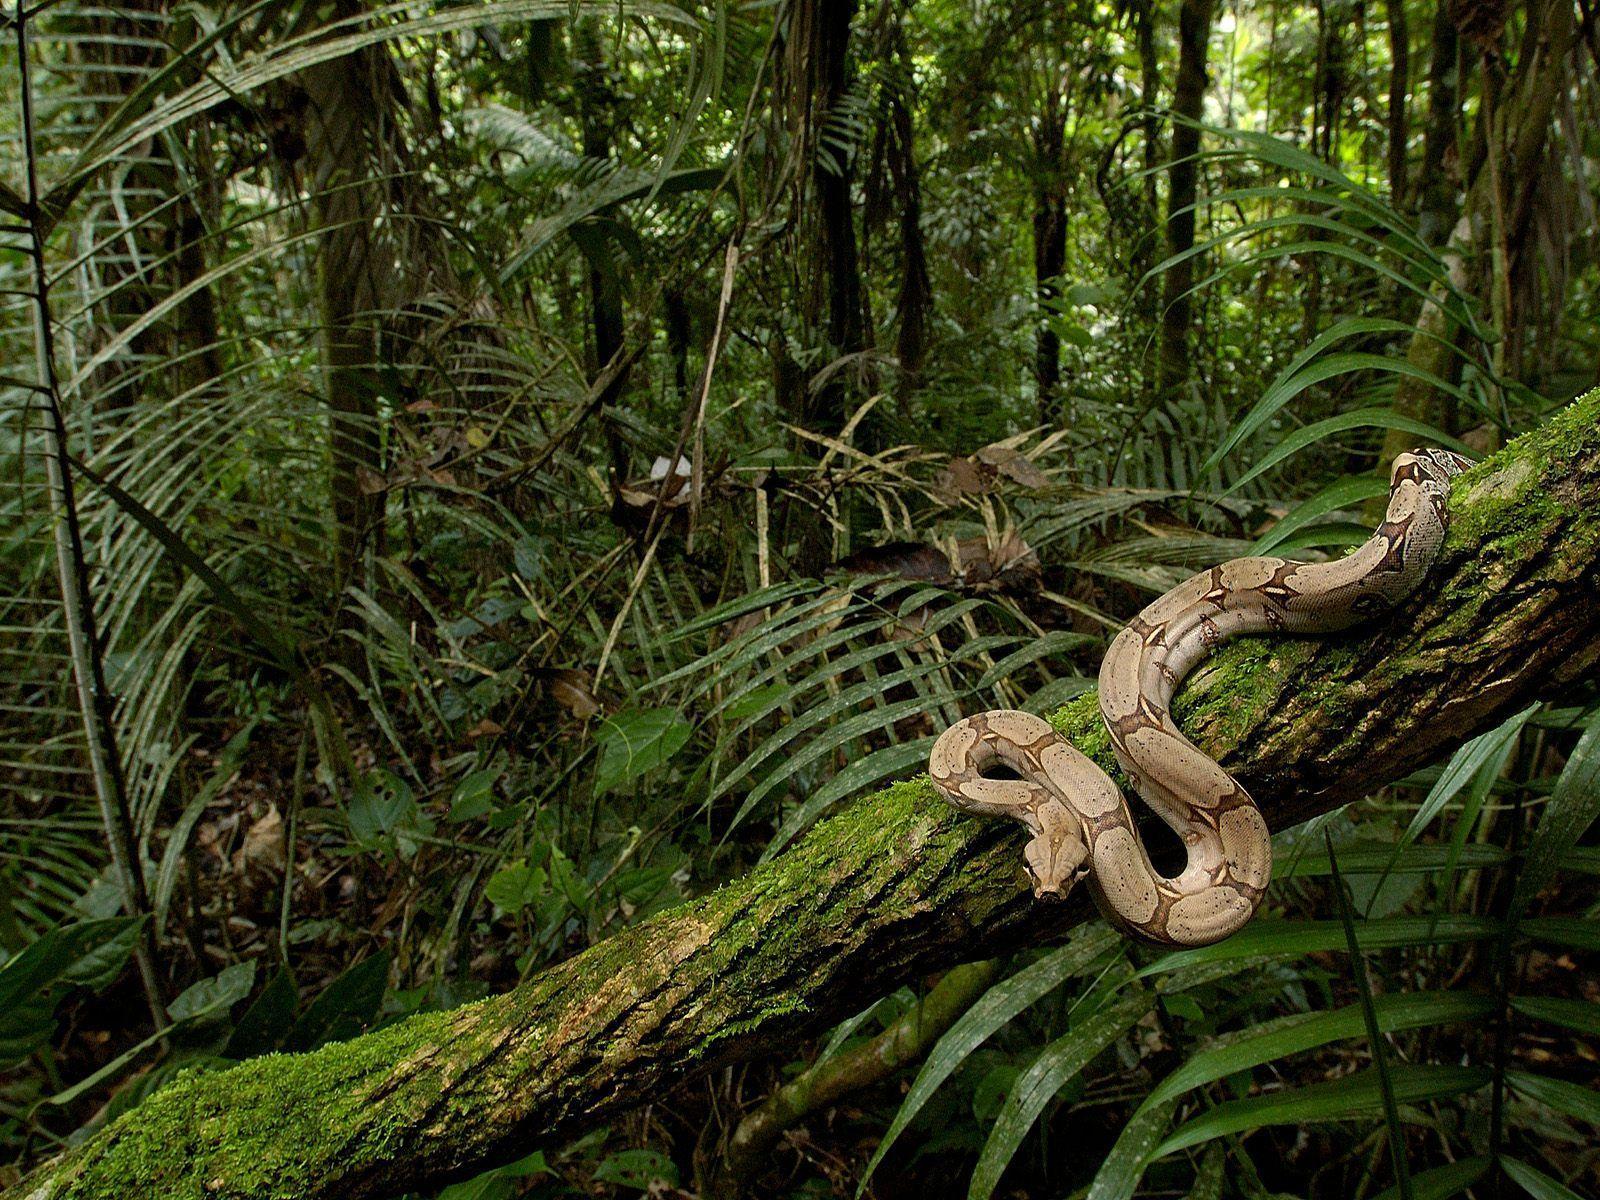 Free HQ Boa Constrictor In The Rainforest South America Wallpapers